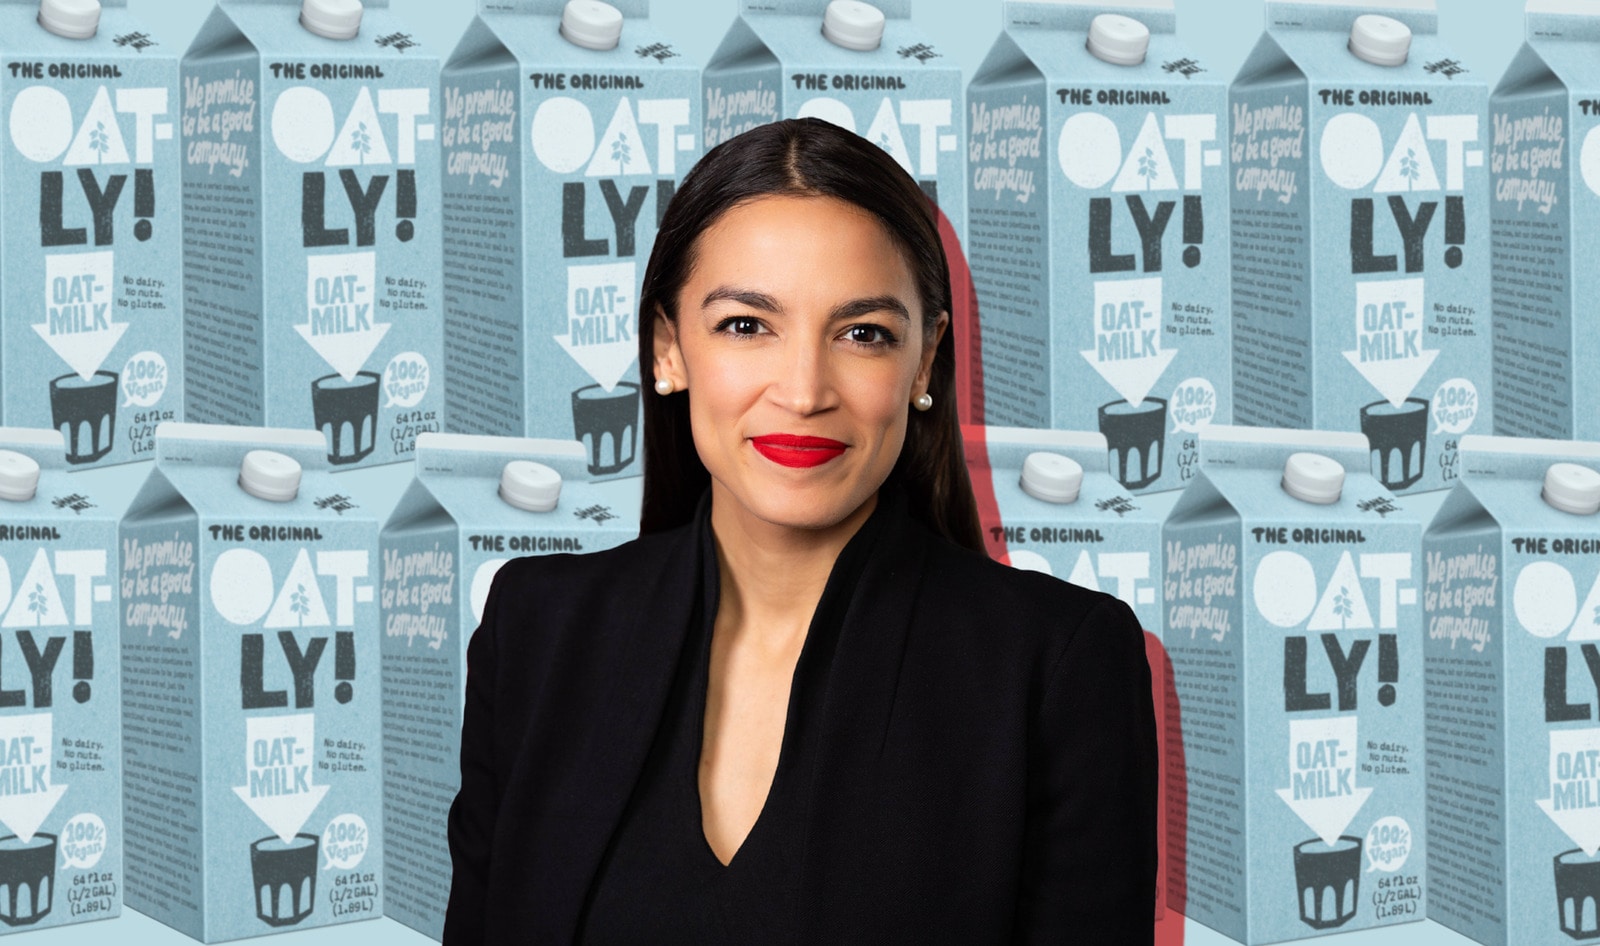 Alexandria Ocasio-Cortez’ Favorite Milks Are Made from Oats and Cashews